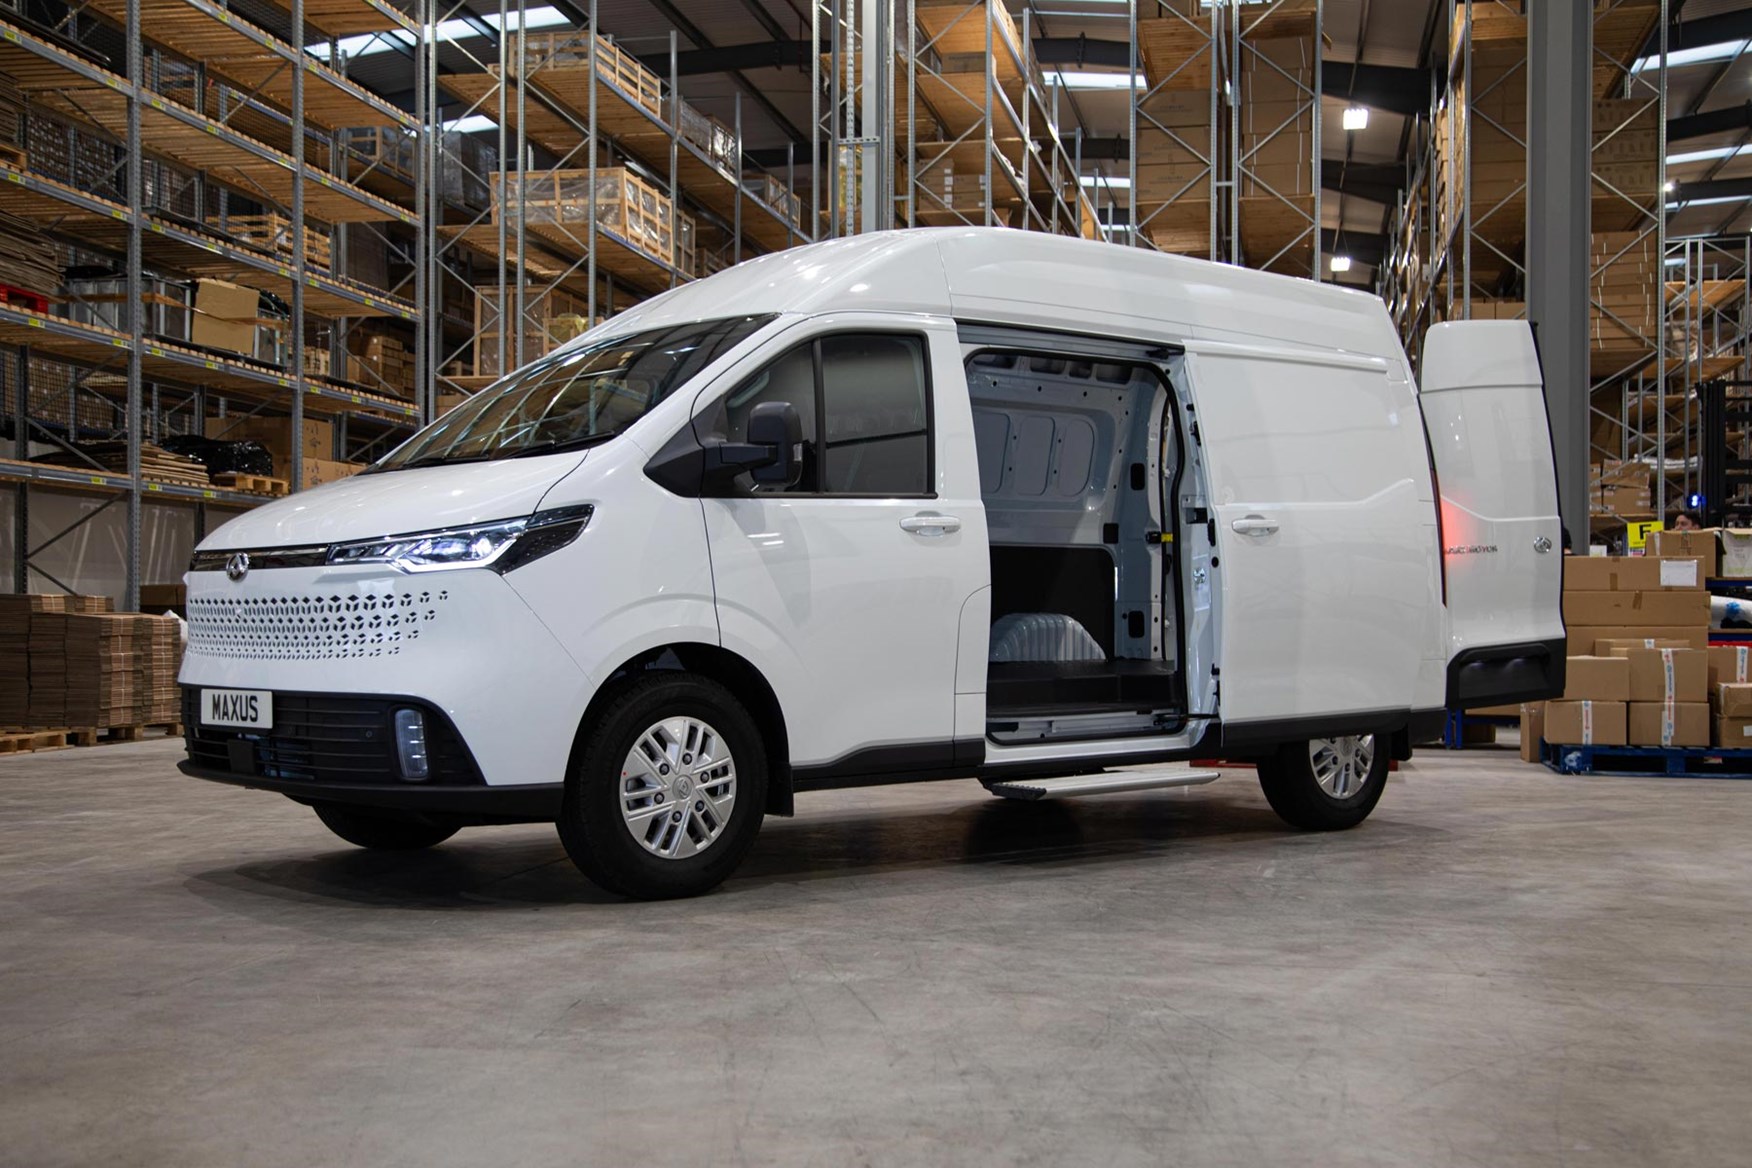 A taller model is a real rarity in the mid-size van class.